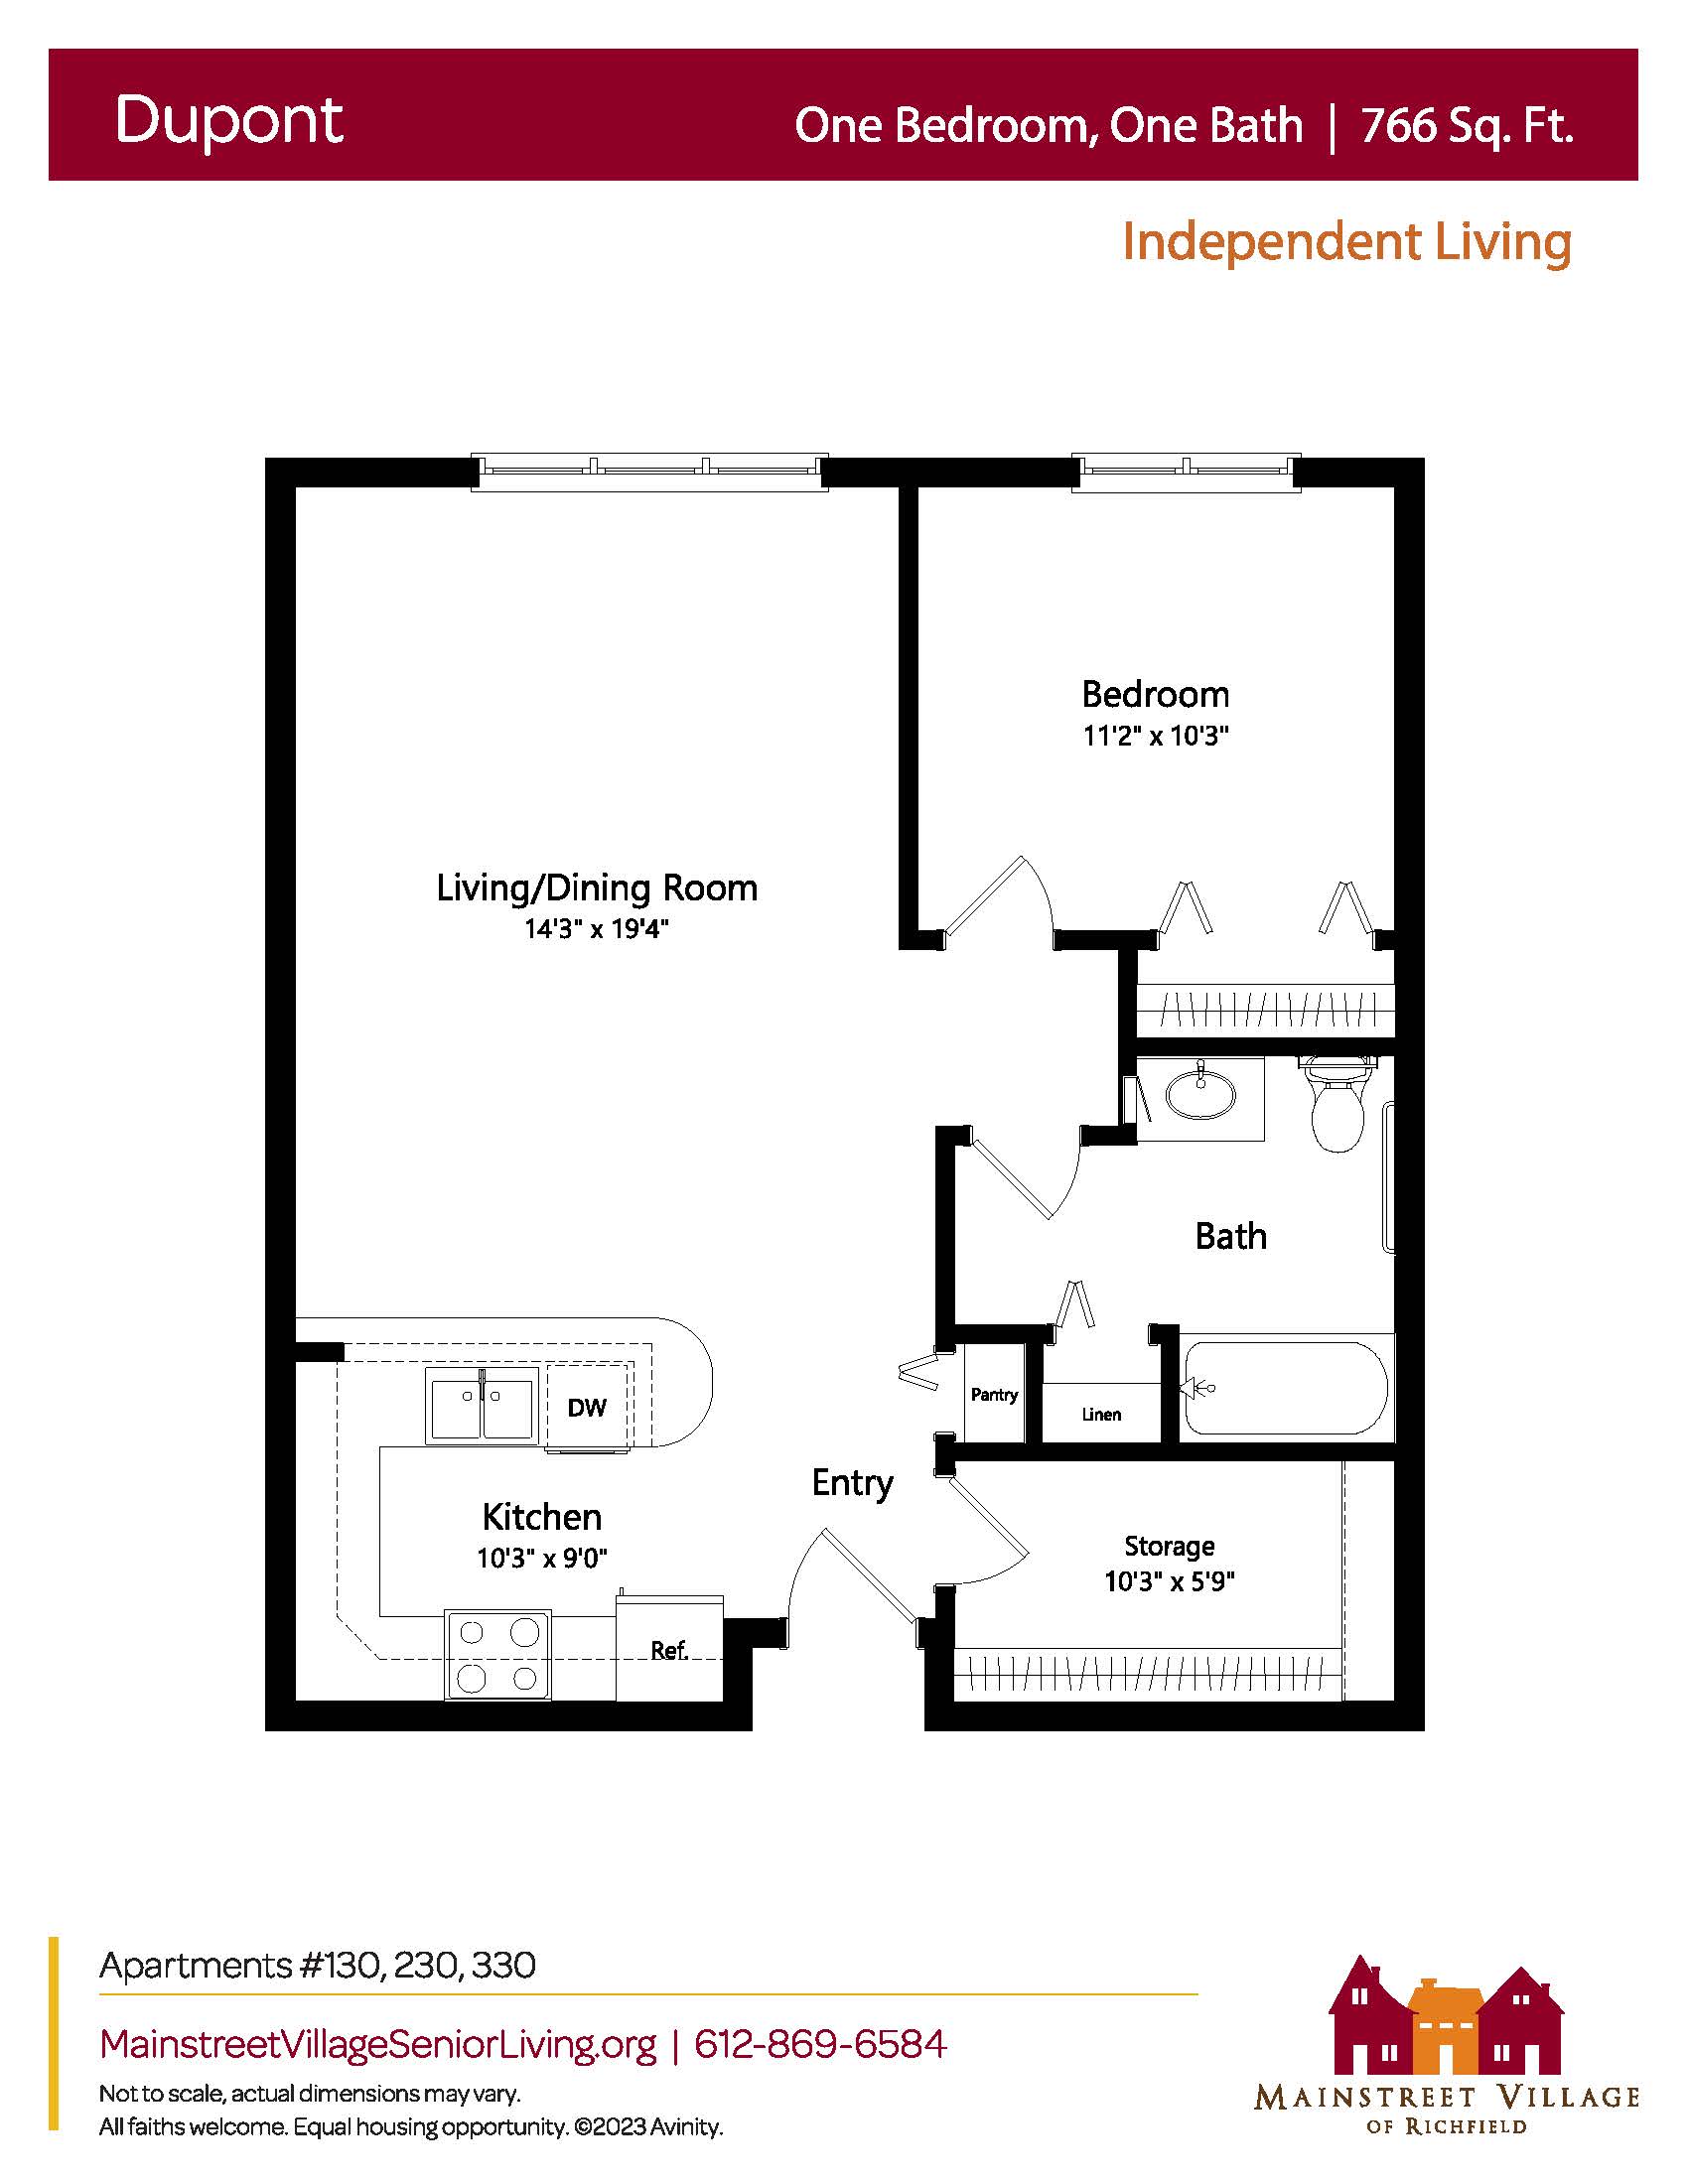 Floor plan for Dupont